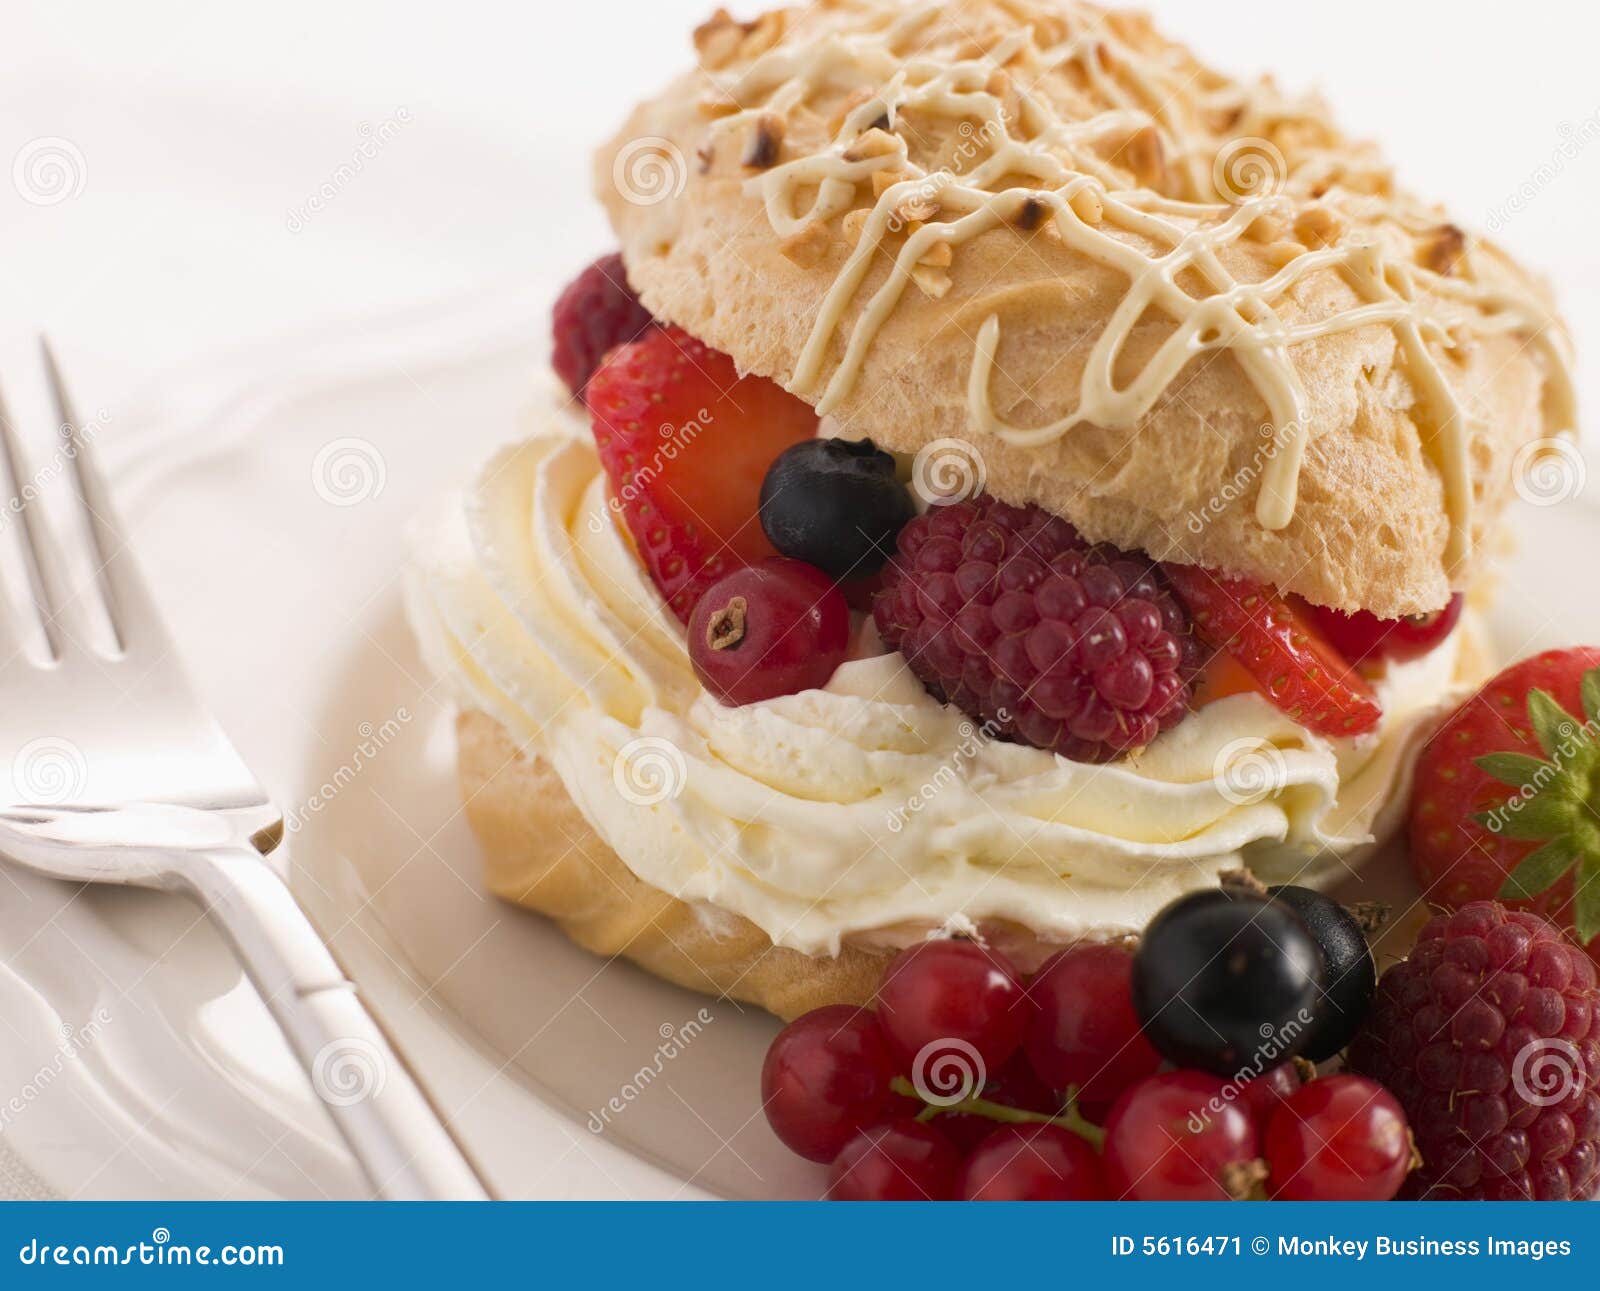 choux bun filled with mixed berries cream